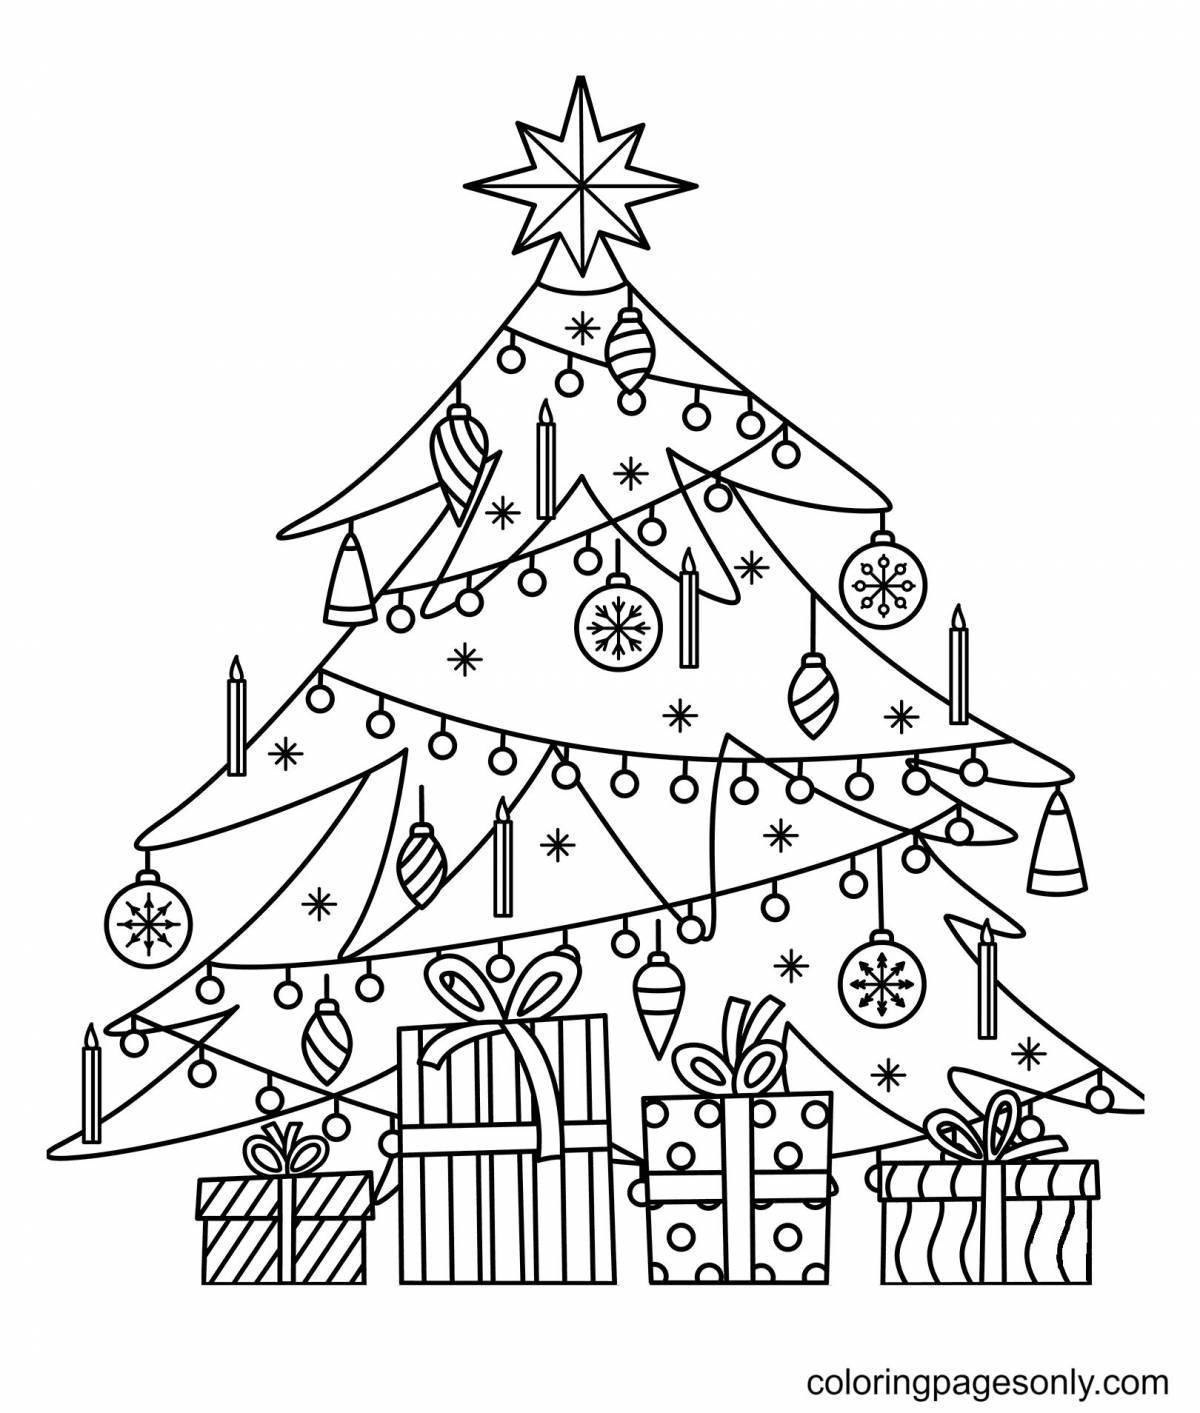 Coloring book luminous forest raised a Christmas tree